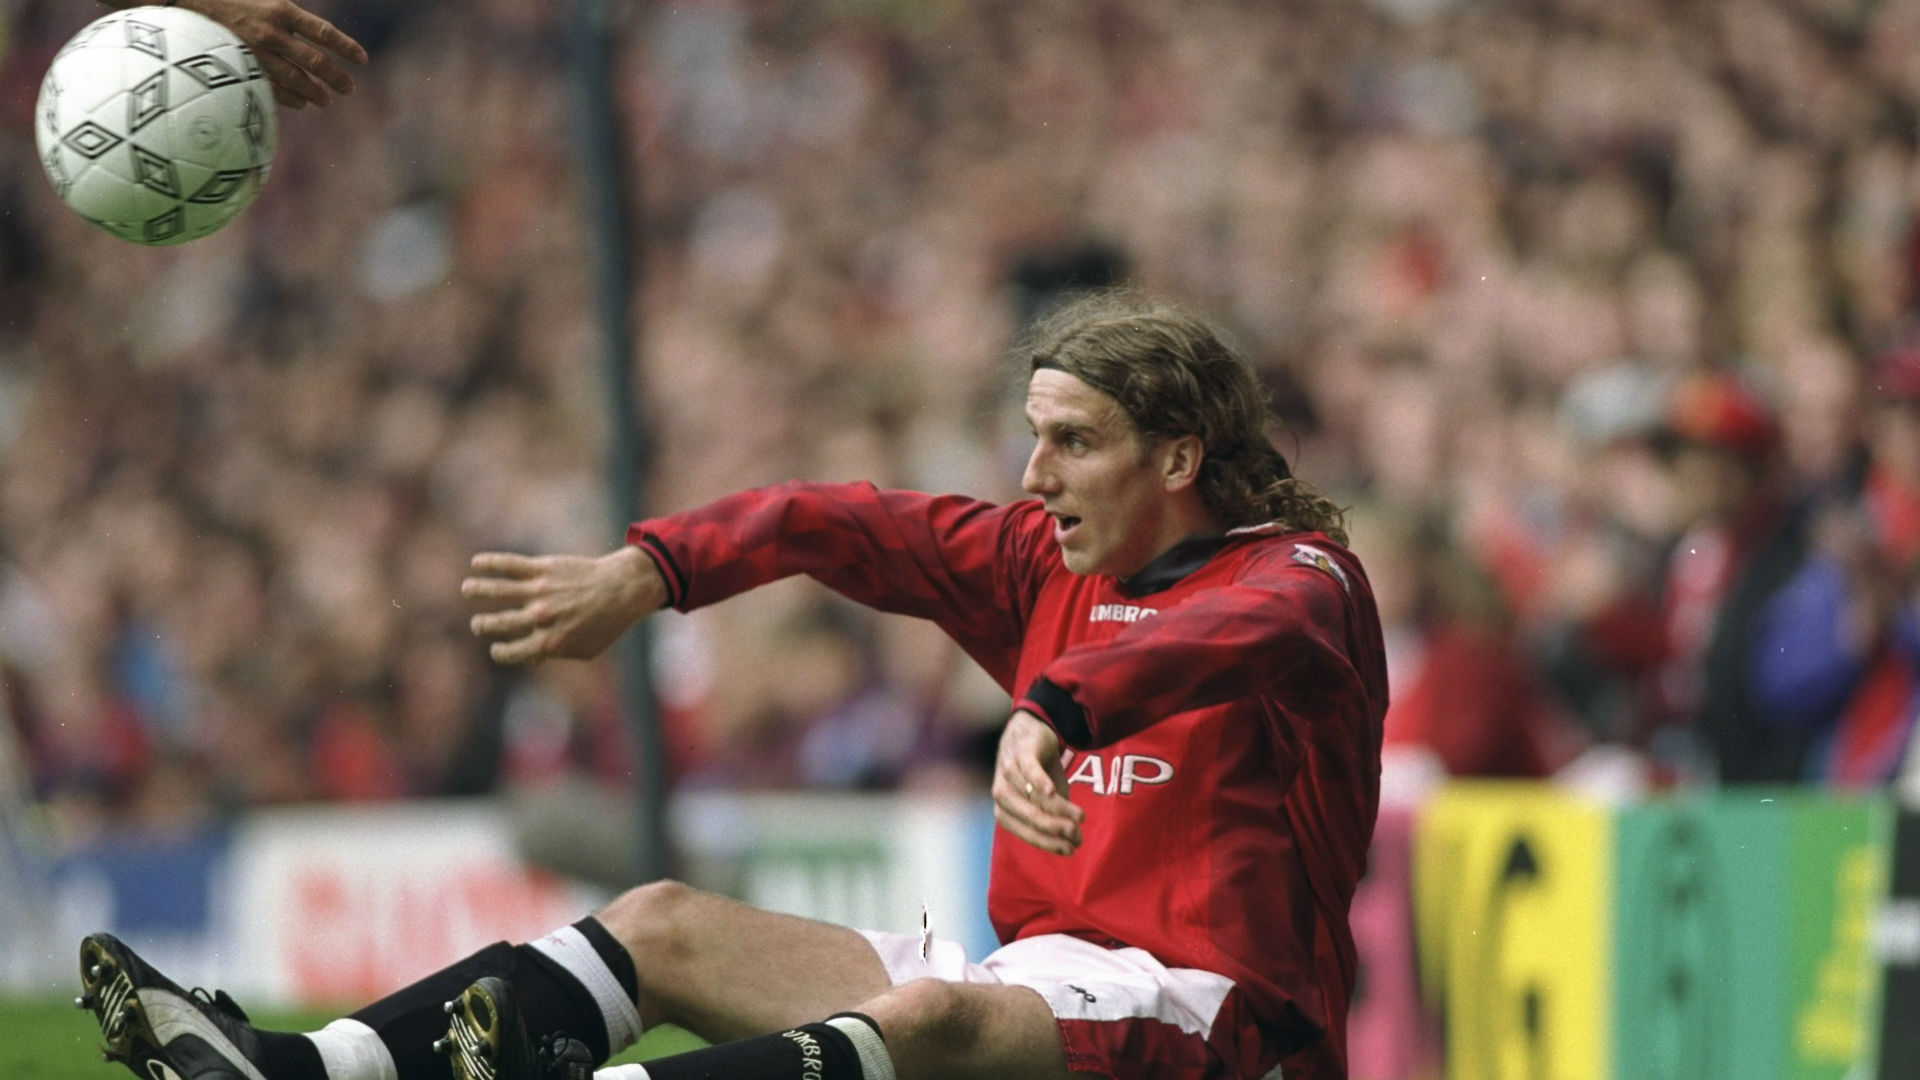 'Beckham impossible to oust from Man Utd team' as Euro 96 icon Poborsky reflects on Old Trafford career